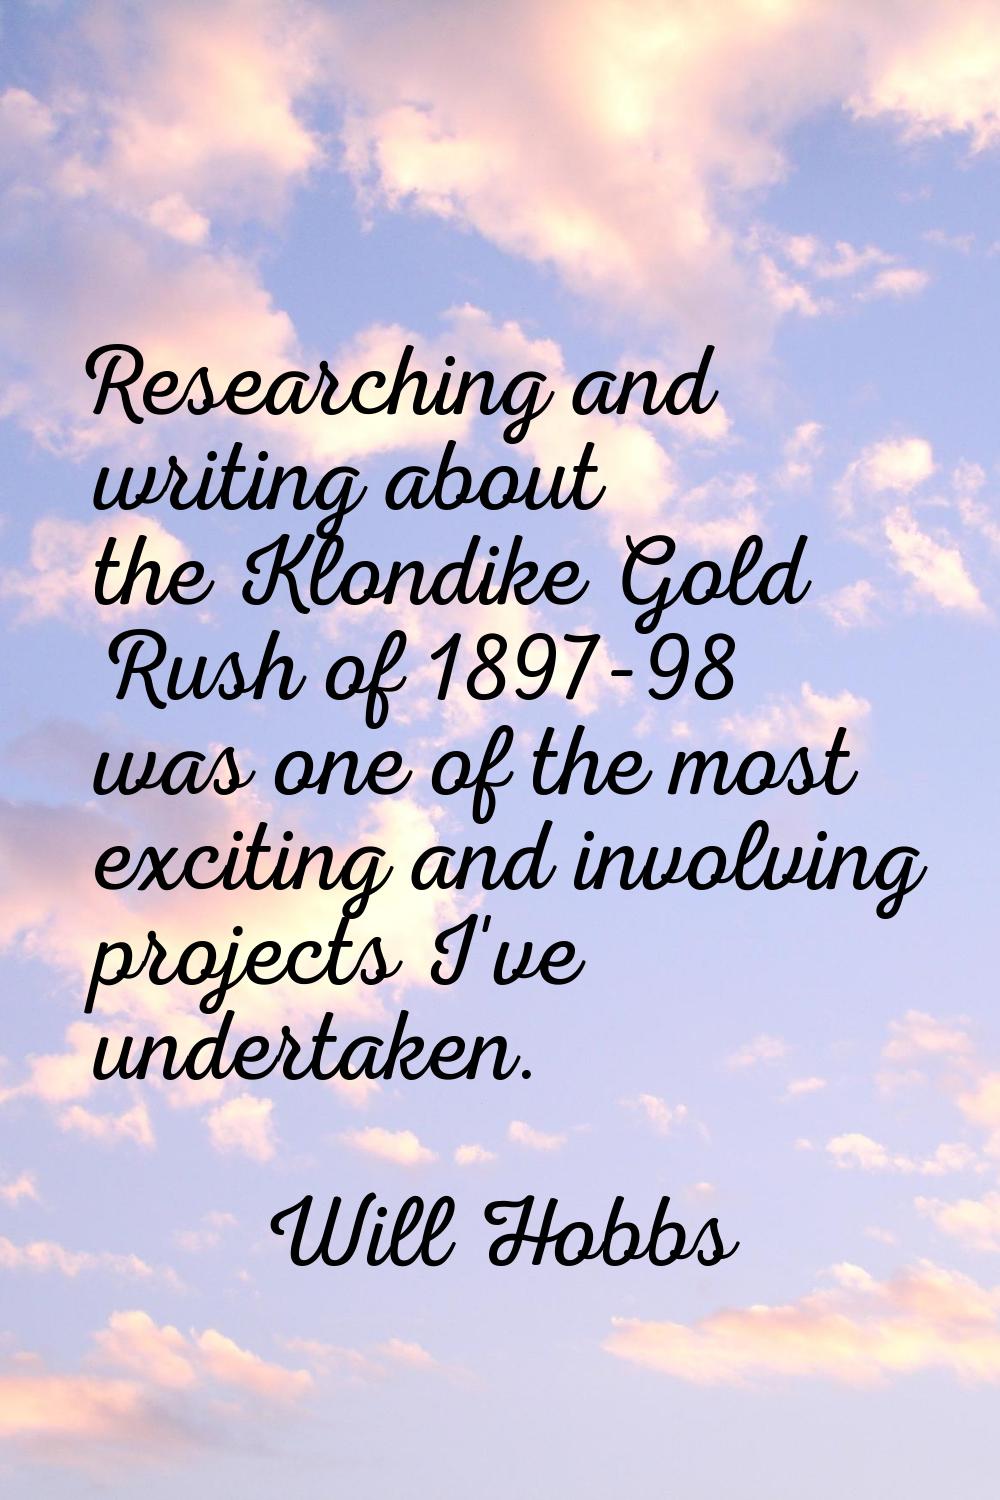 Researching and writing about the Klondike Gold Rush of 1897-98 was one of the most exciting and in